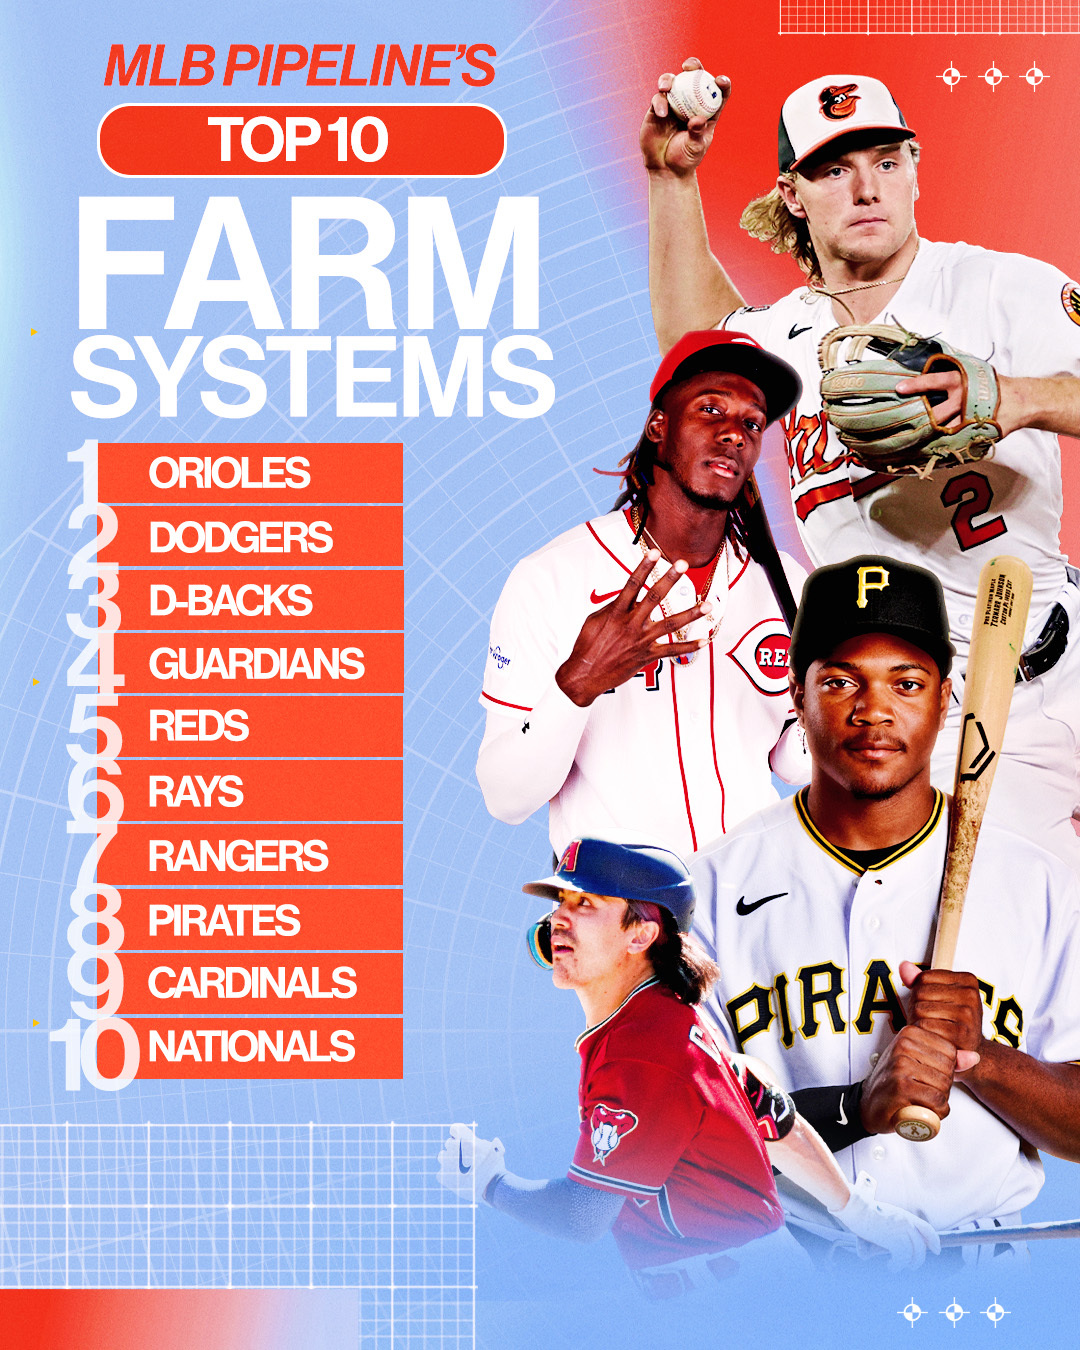 MLB on Twitter "Best of the next wave. Here are the 10 best farm